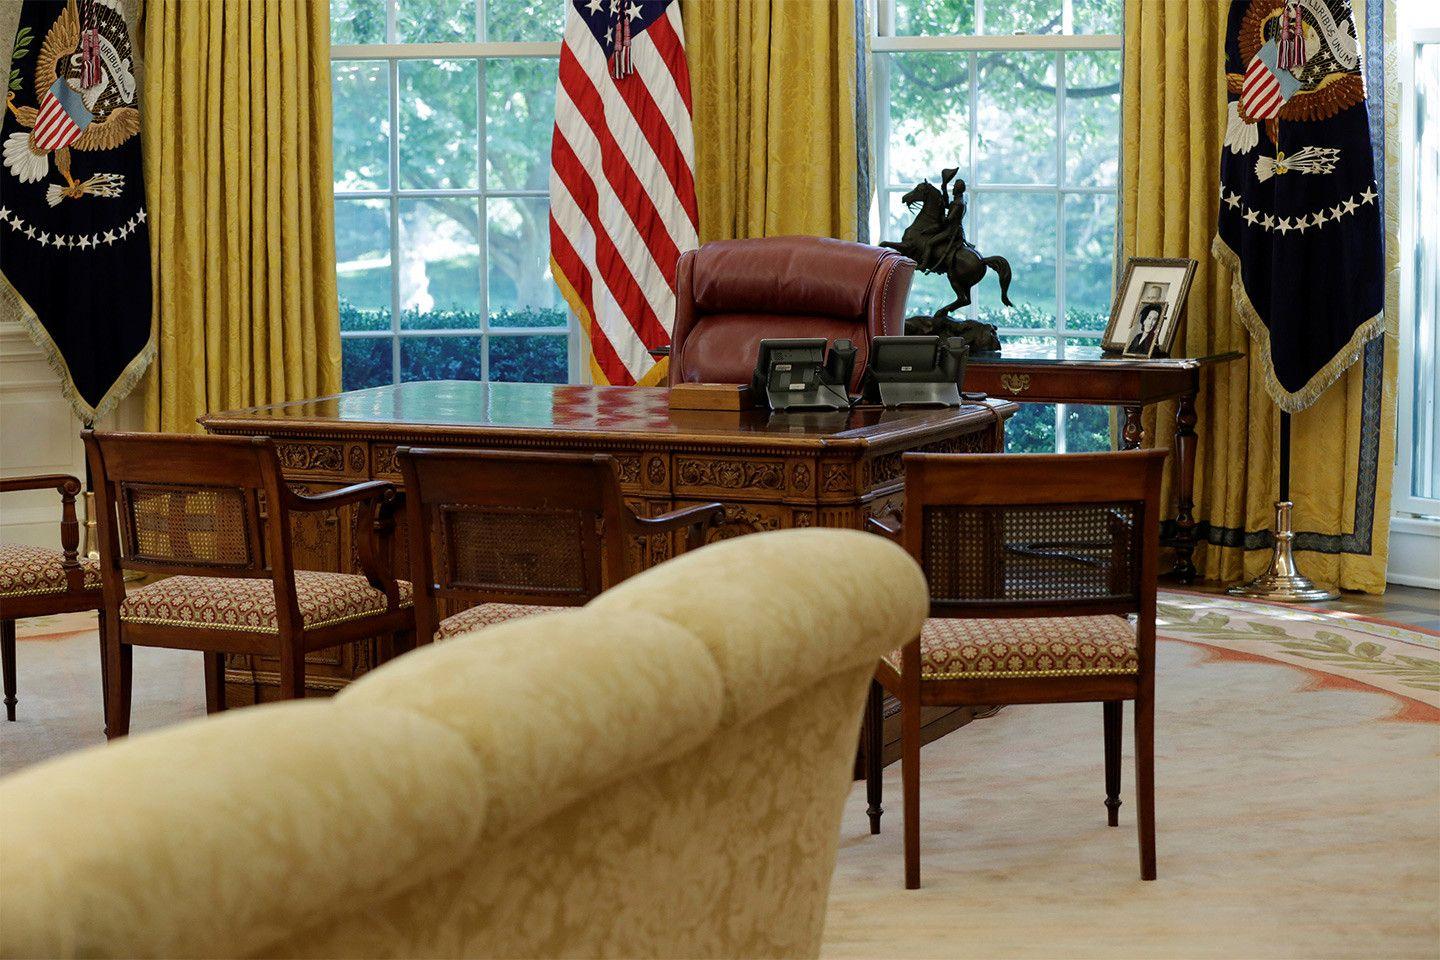 white house oval office zoom background